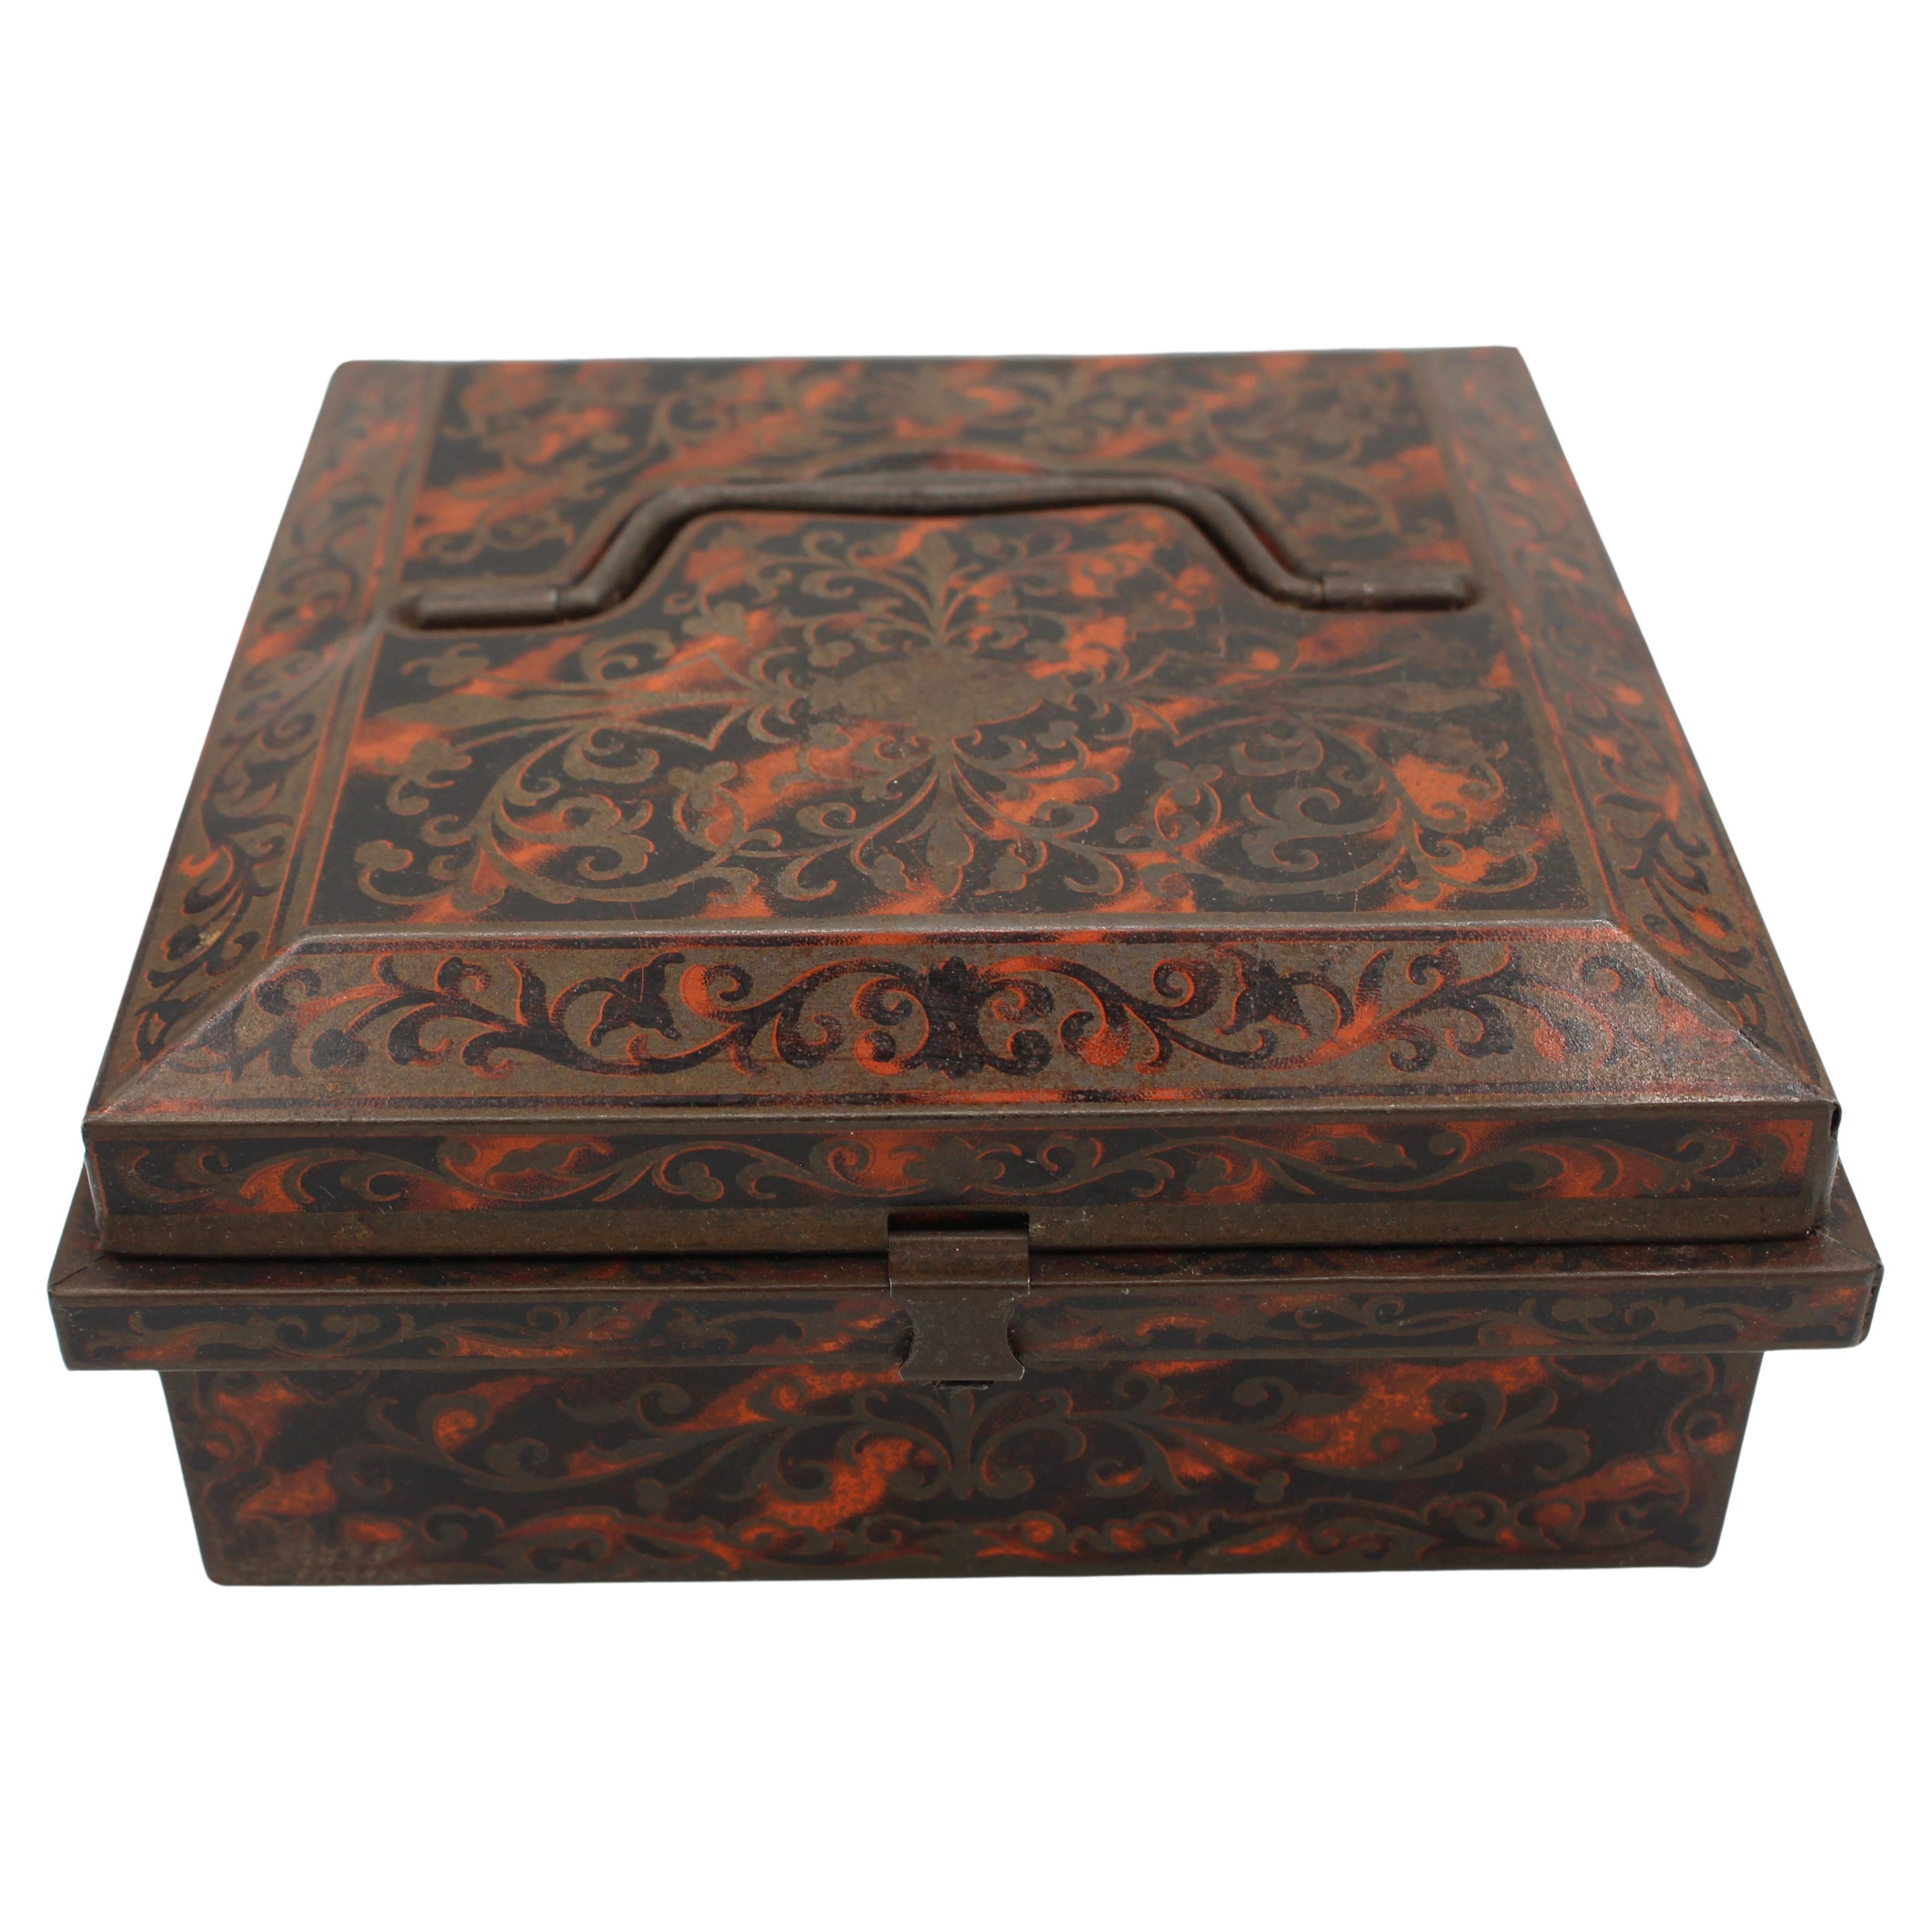 1904 Huntley & Palmers Faux Boulle Biscuit Tin Box For Sale